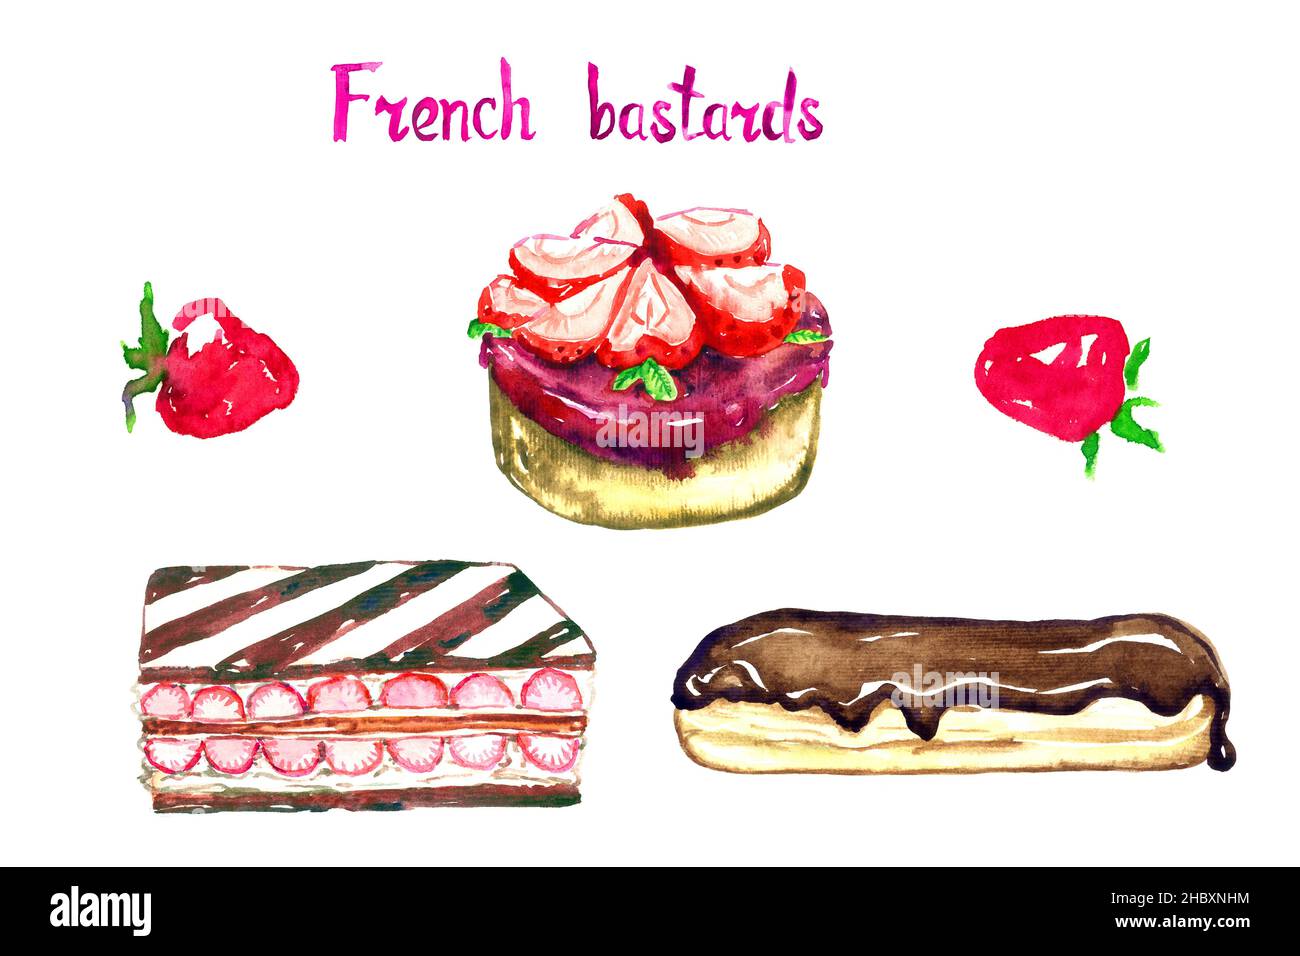 French bastards collection, tartelette with strawberries, Strawberry millefeuille (Millefeuille fraise), Eclair isolated on white watercolor Stock Photo